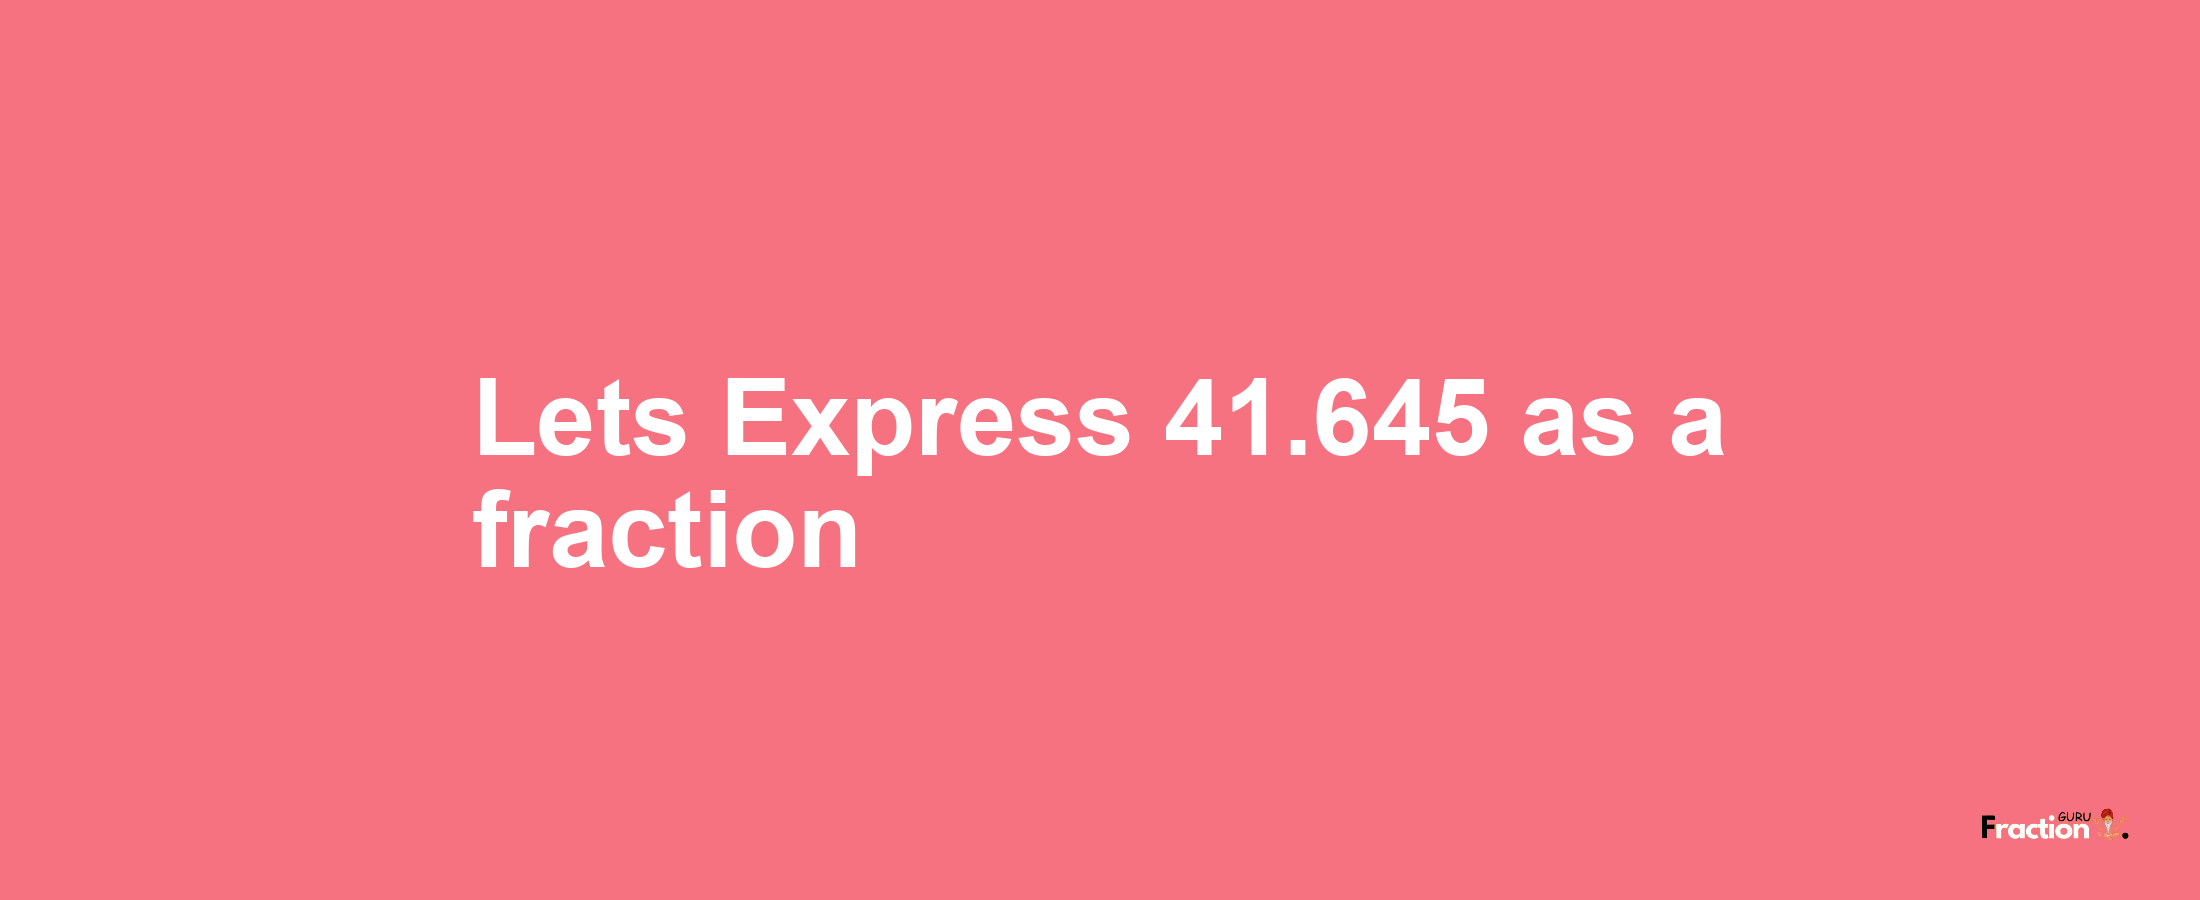 Lets Express 41.645 as afraction